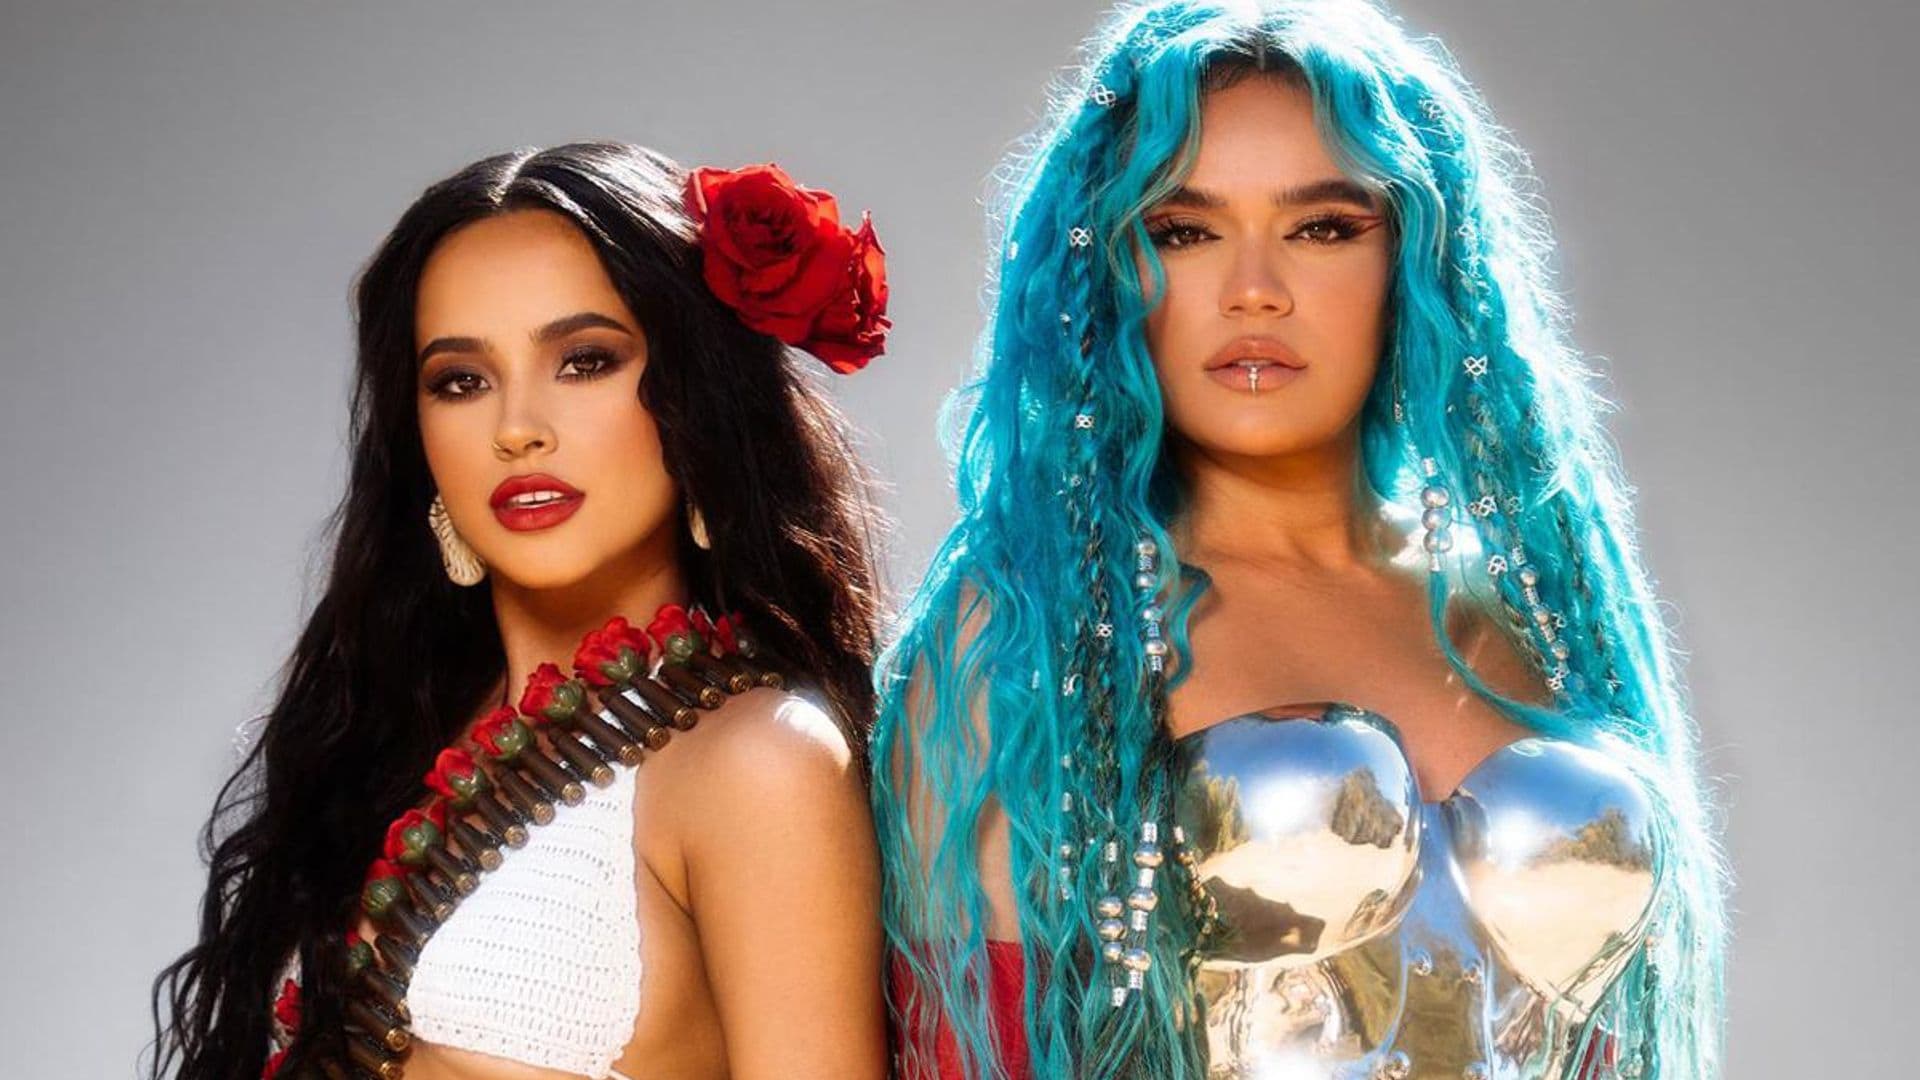 New Music Friday: the biggest releases from Karol G, Becky G, and more